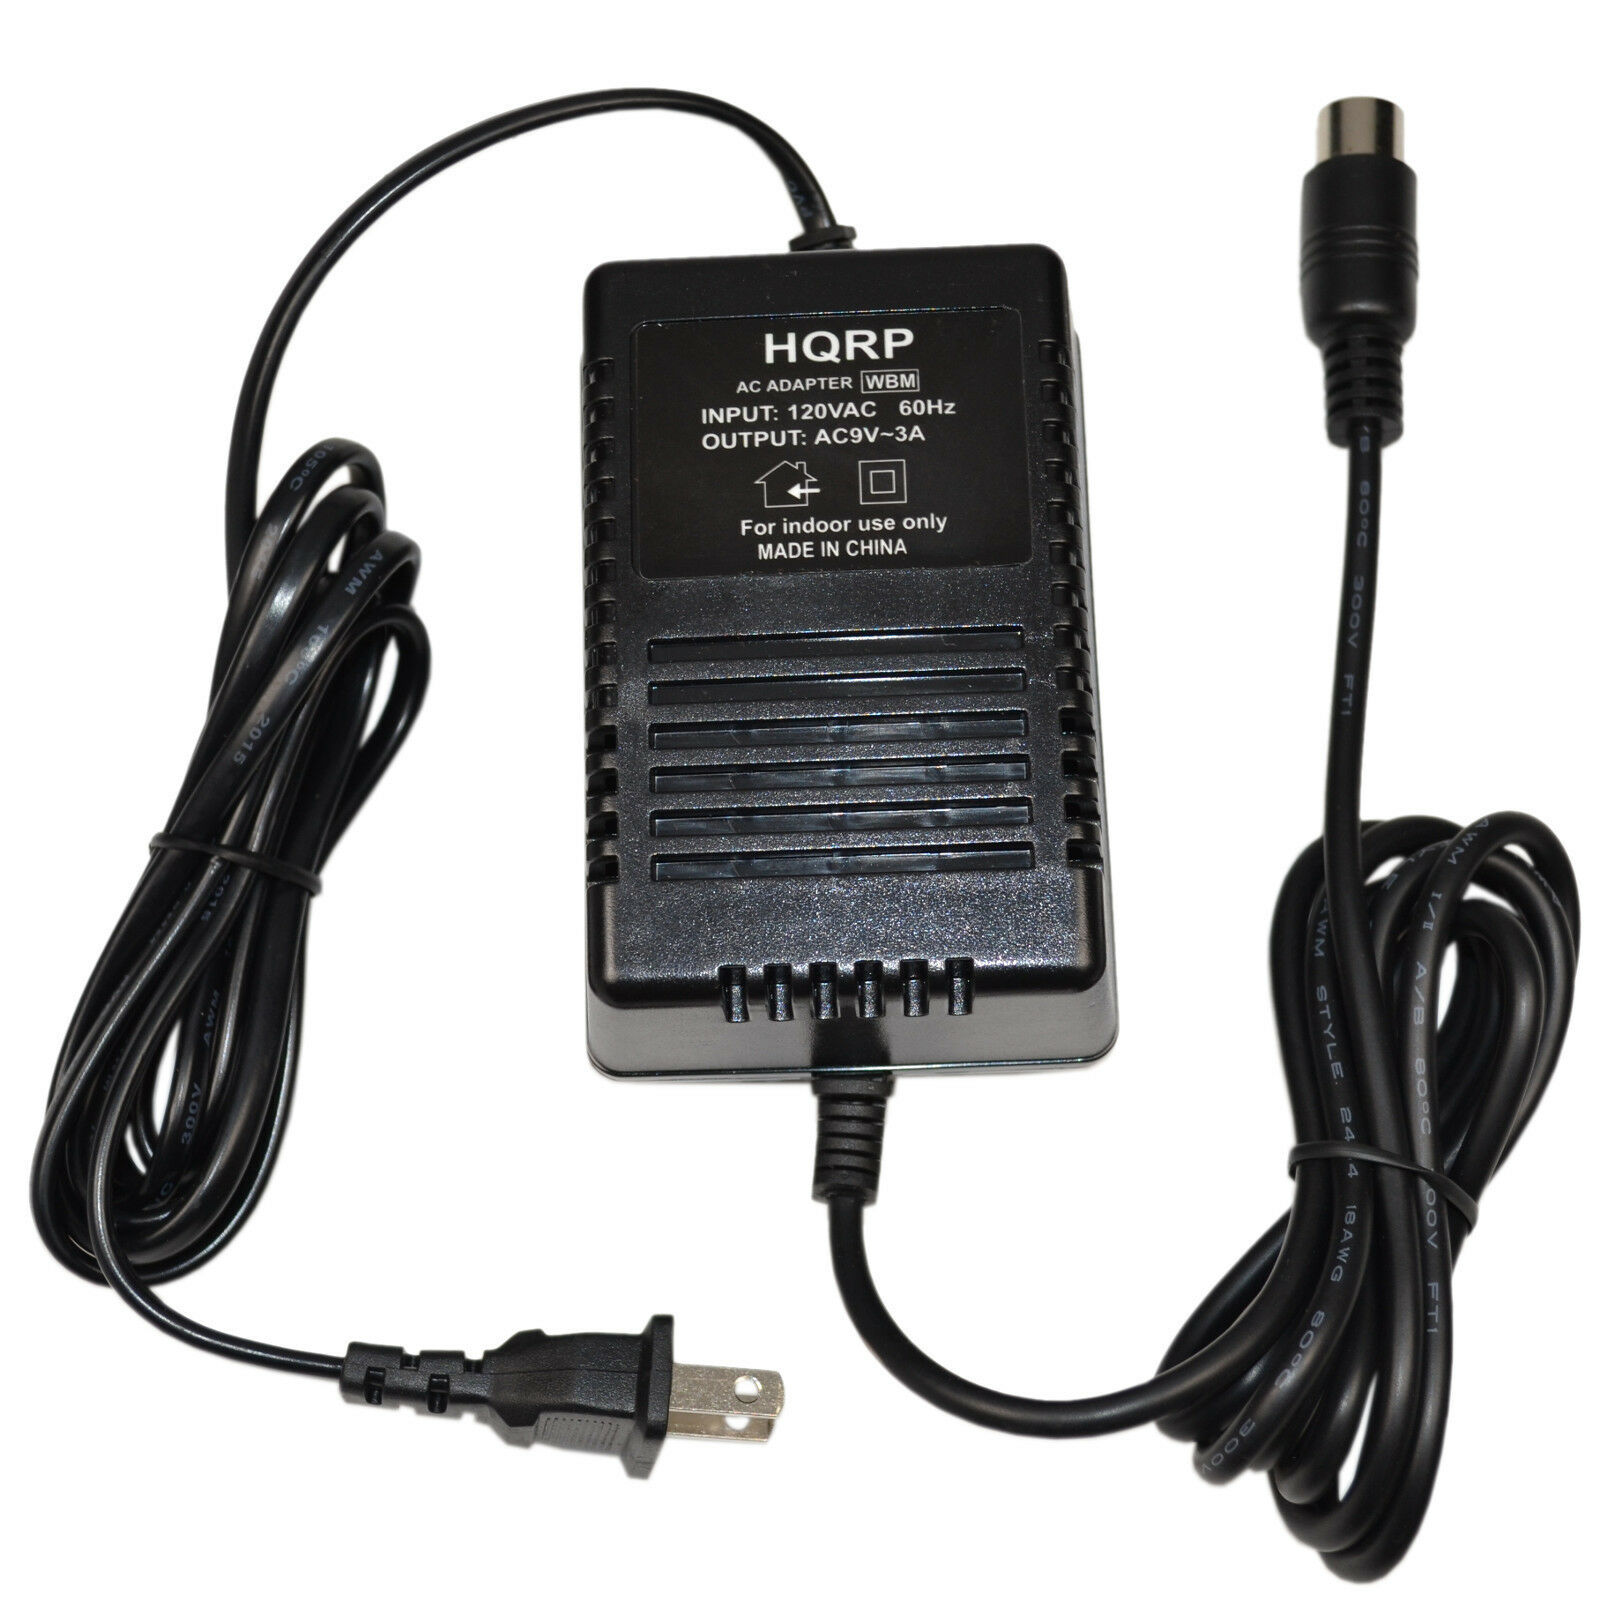 Power Supply AC Adapter for Korg Electribe MX EMX-1 KM2 N1 N1R N5 TR88 SP500 Compatible Brand: For Korg Suited For: - Click Image to Close